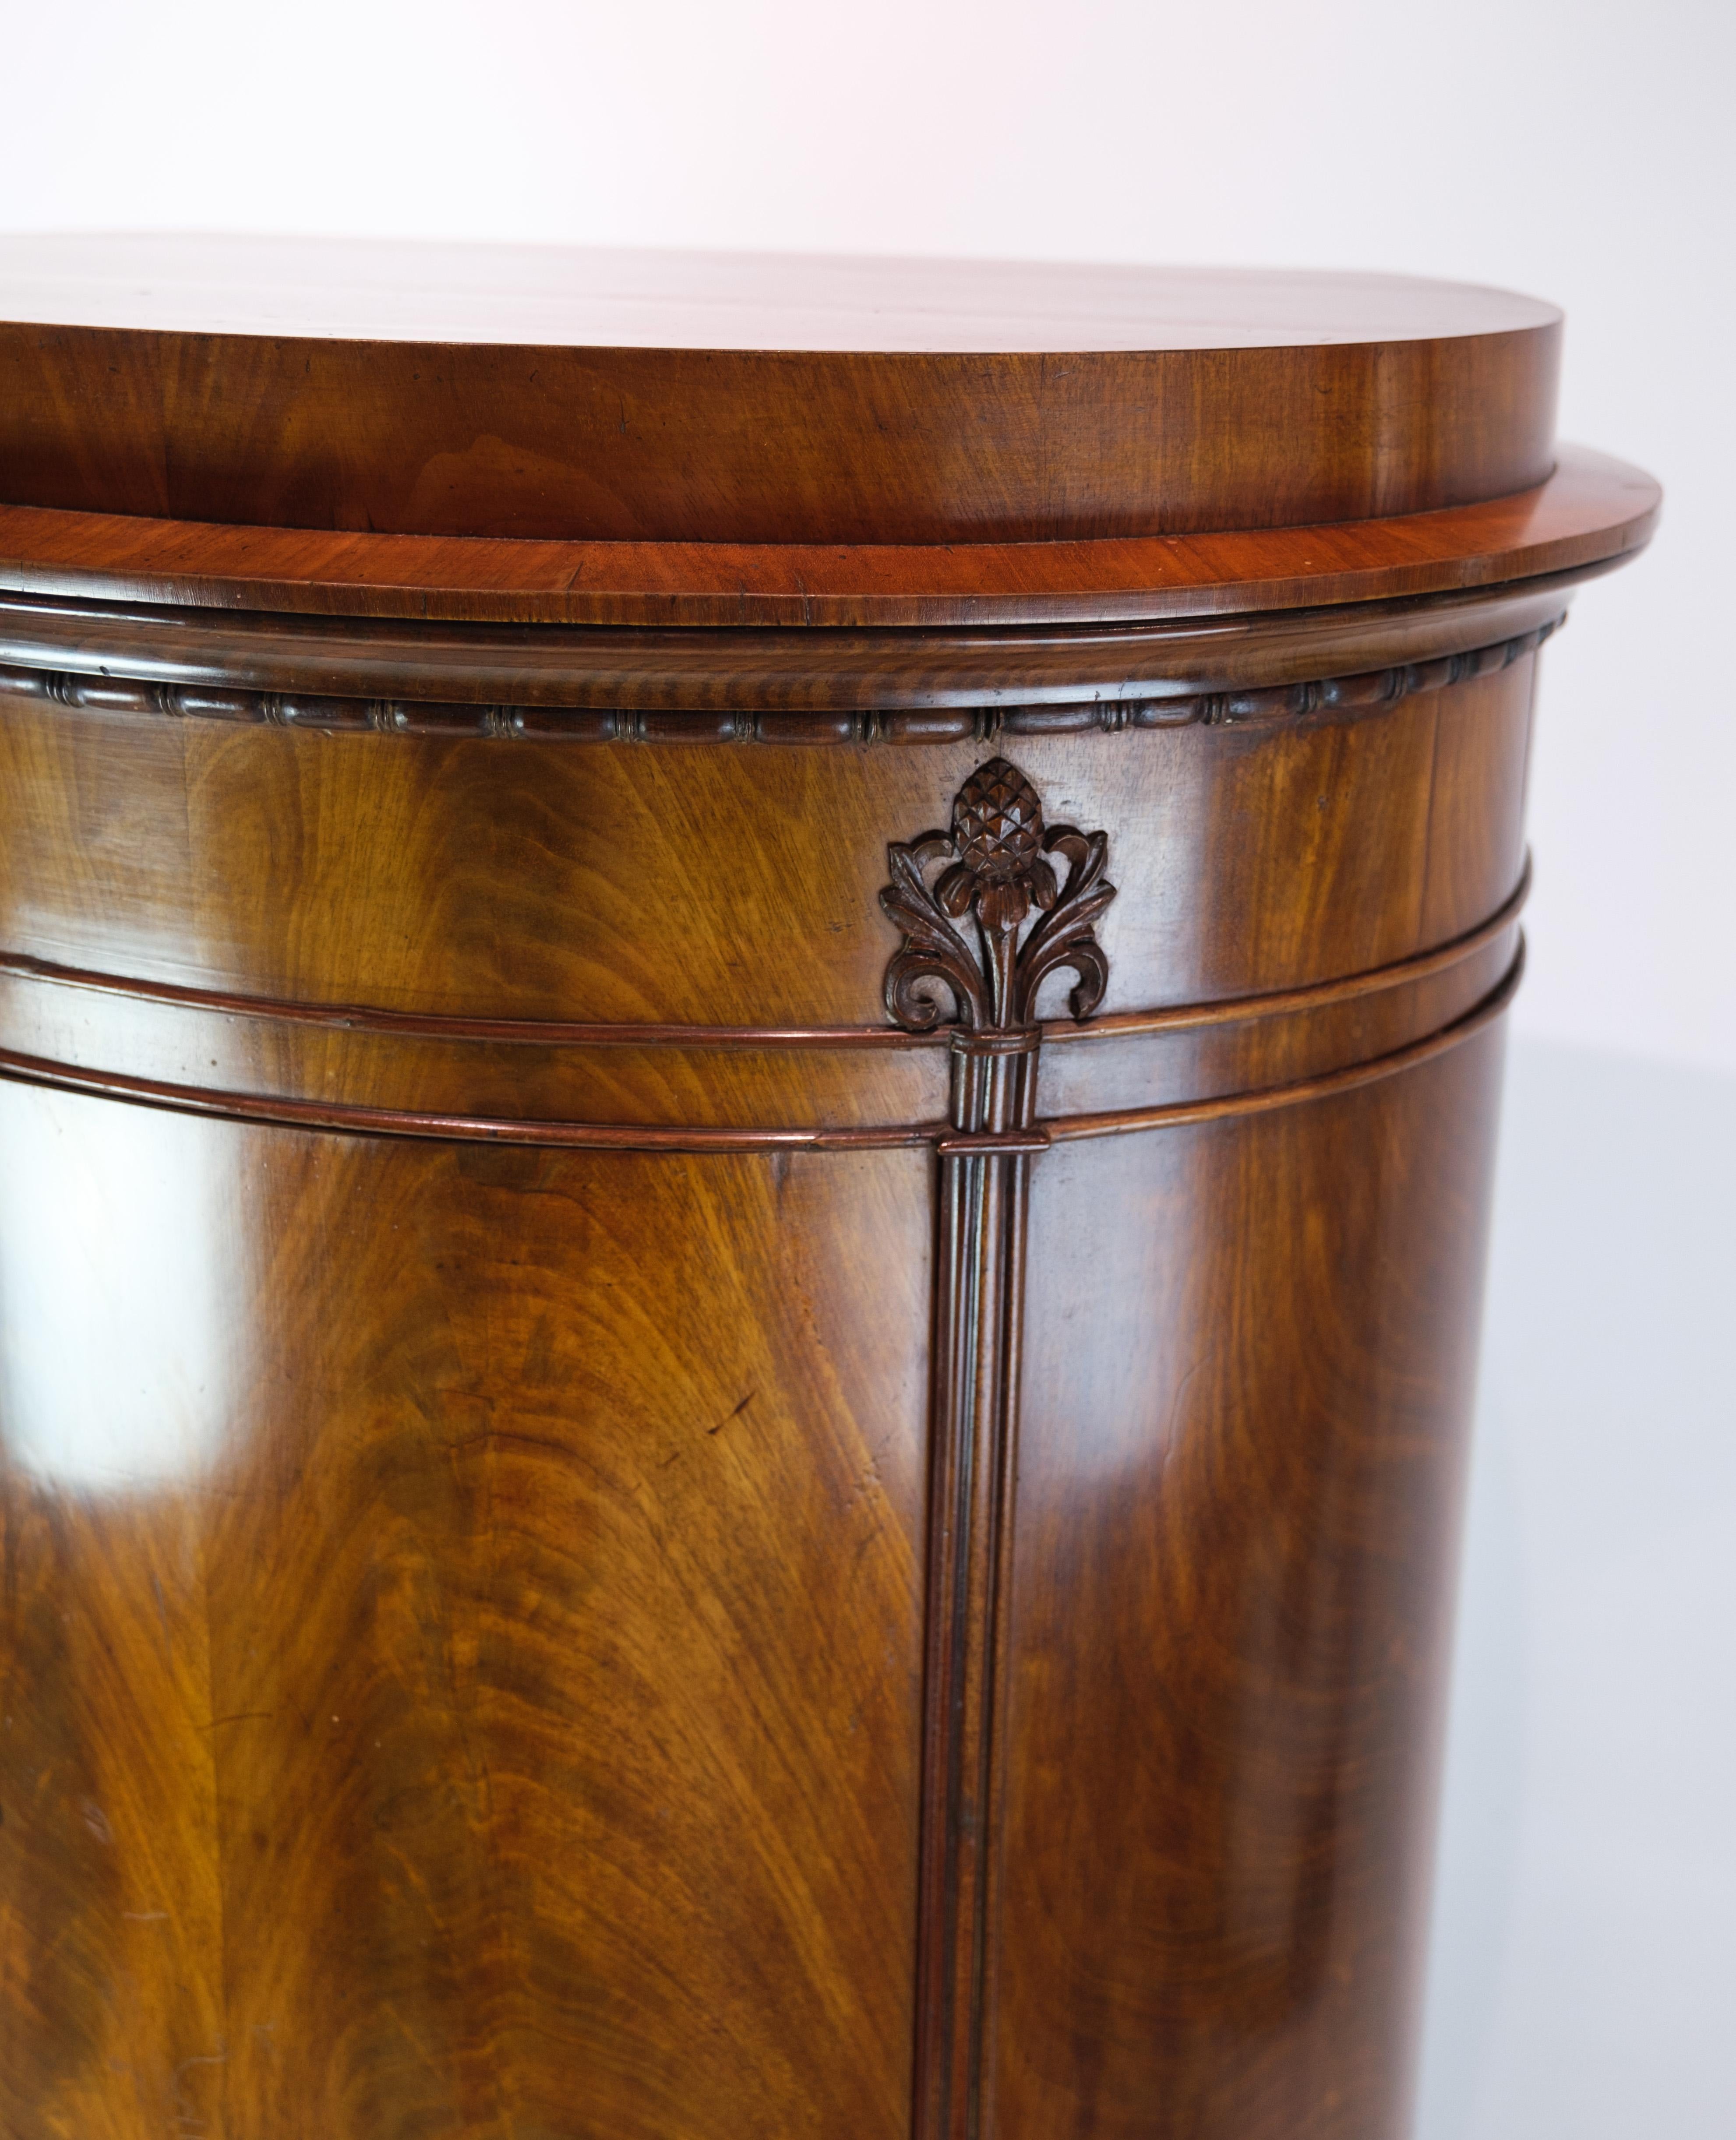 Antique mahogany pedestal cabinet with carvings and beautiful structure in the wood from around the 1840s.
Measurements in cm: H:138, W:64, D:38.